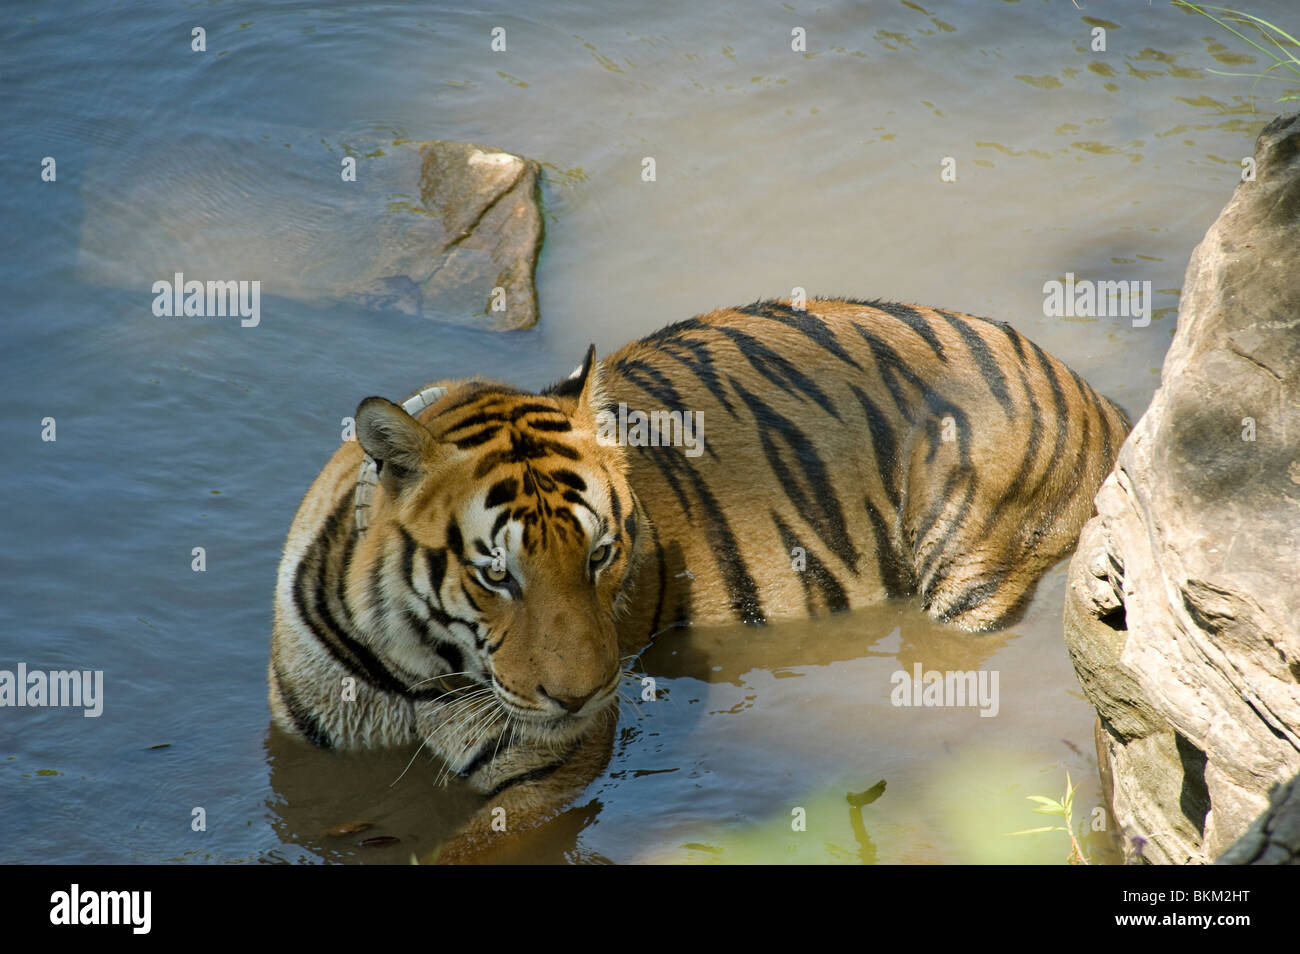 Bengal tiger relaxing by cooling off in water Kanha NP, India Stock Photo